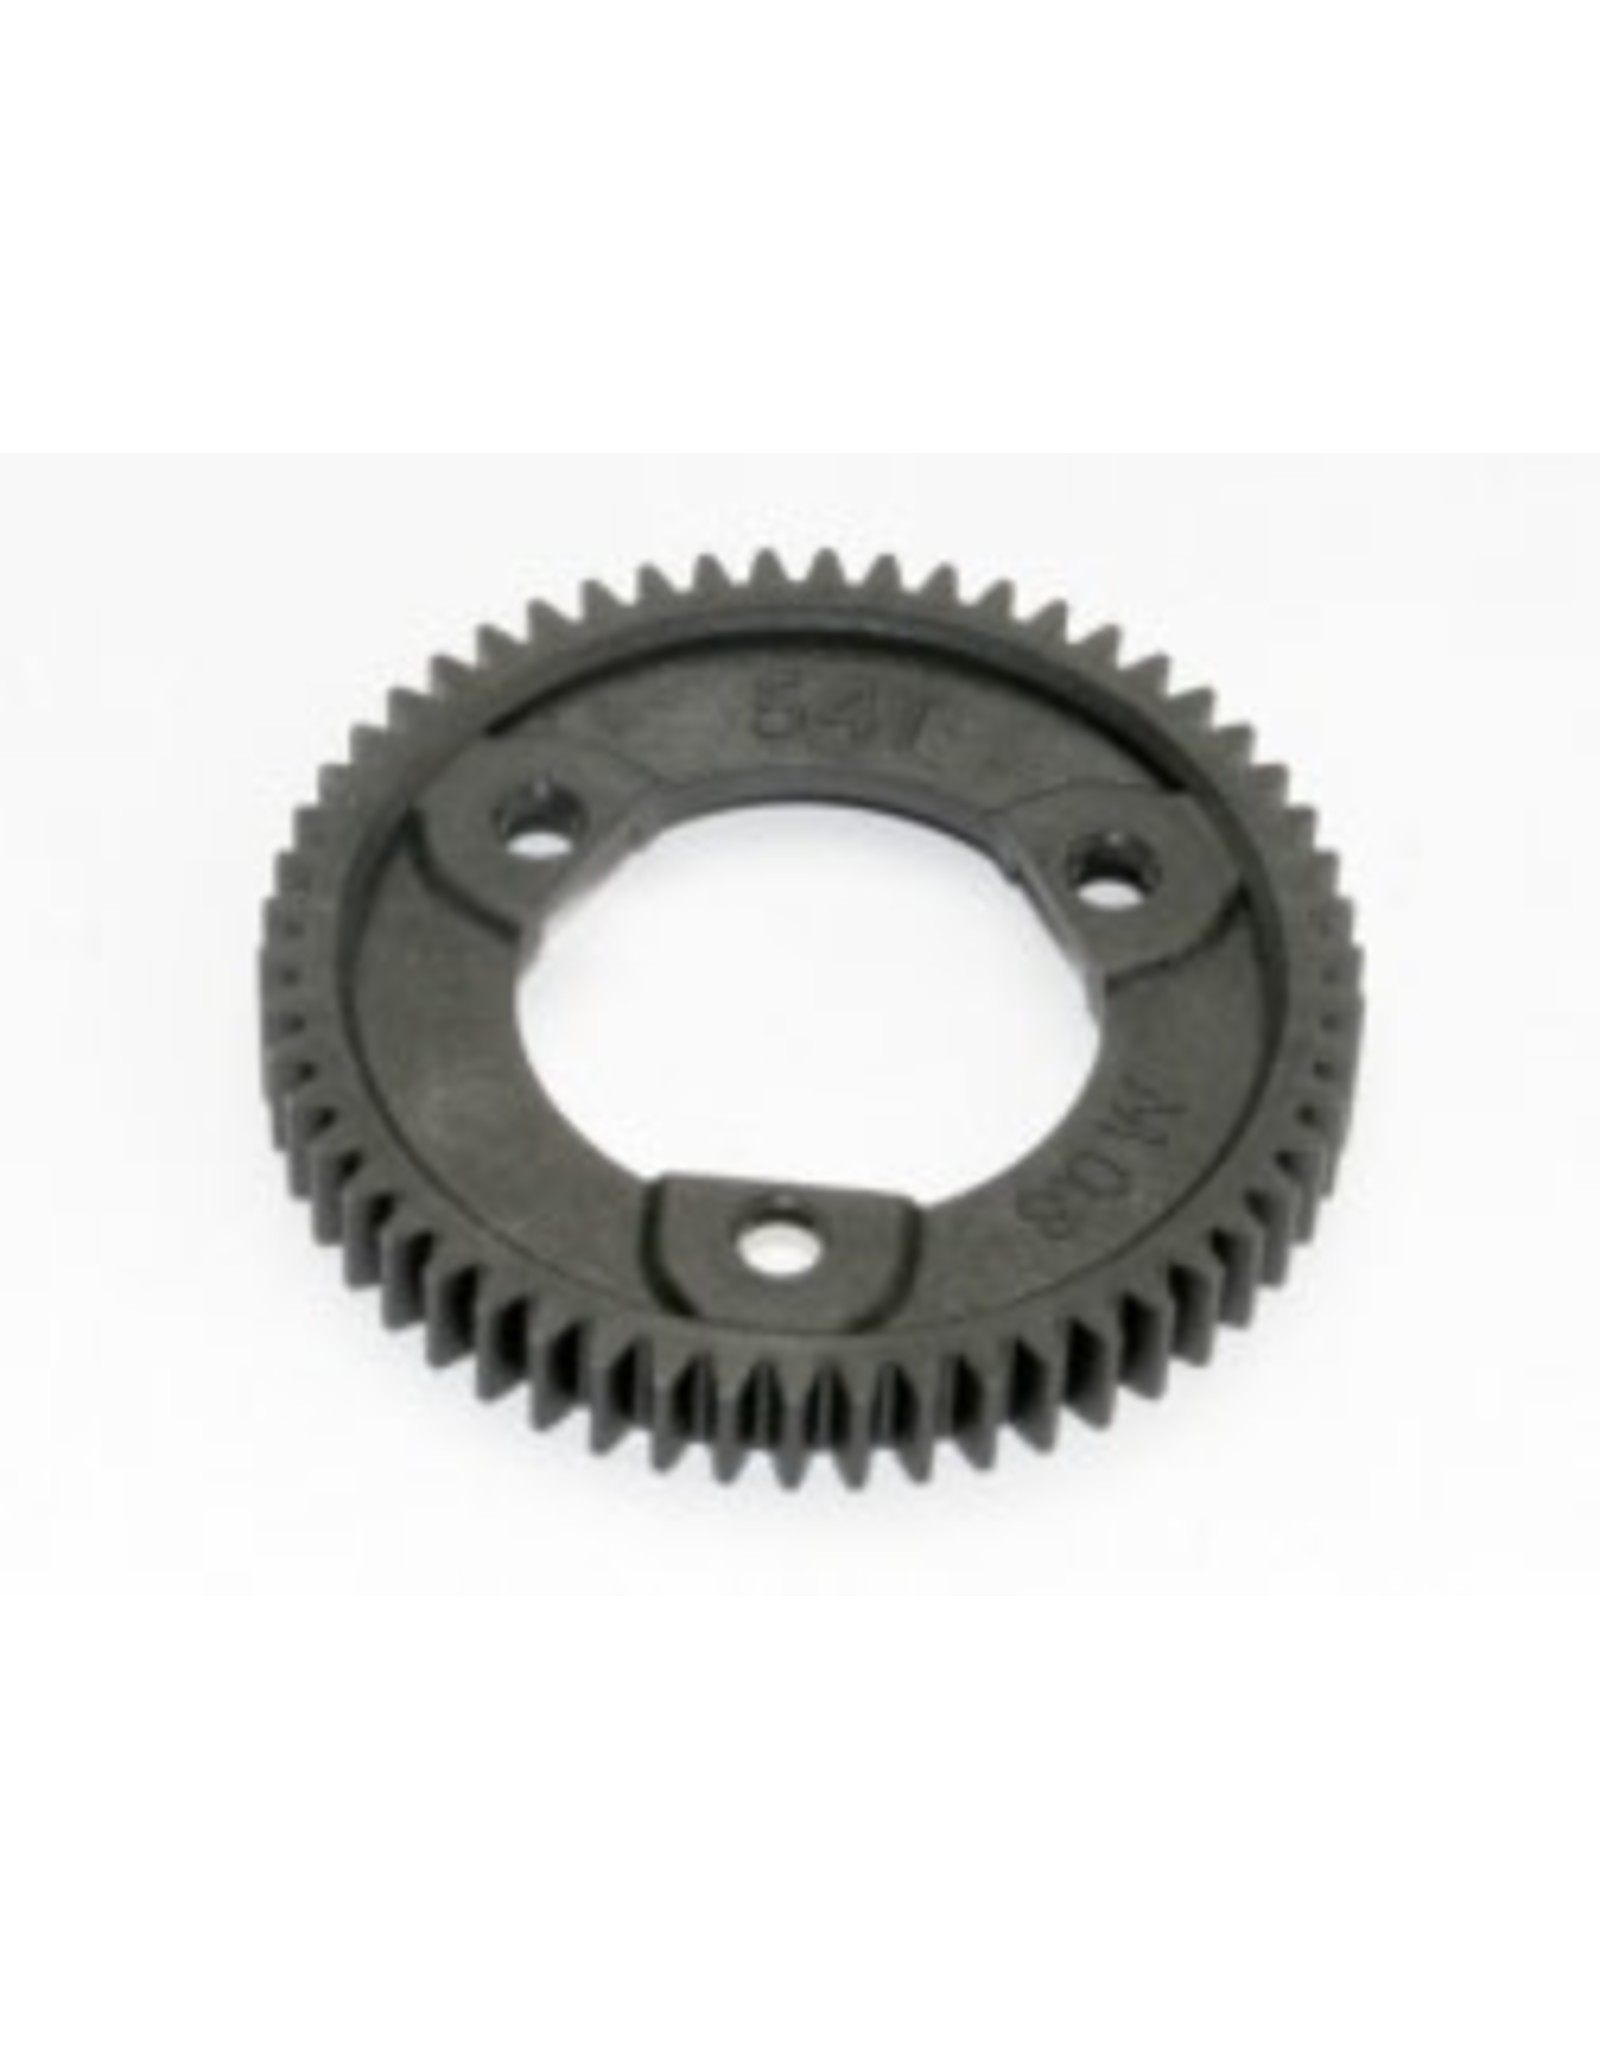 Traxxas [Spur gear, 54-tooth (0.8 metric pitch, compatible with 32-pitch) (requires #6814 center differential)] Spur gear, 54-tooth (0.8 metric pitch, compatible with 32-pitch) (requires #6814 center differential)